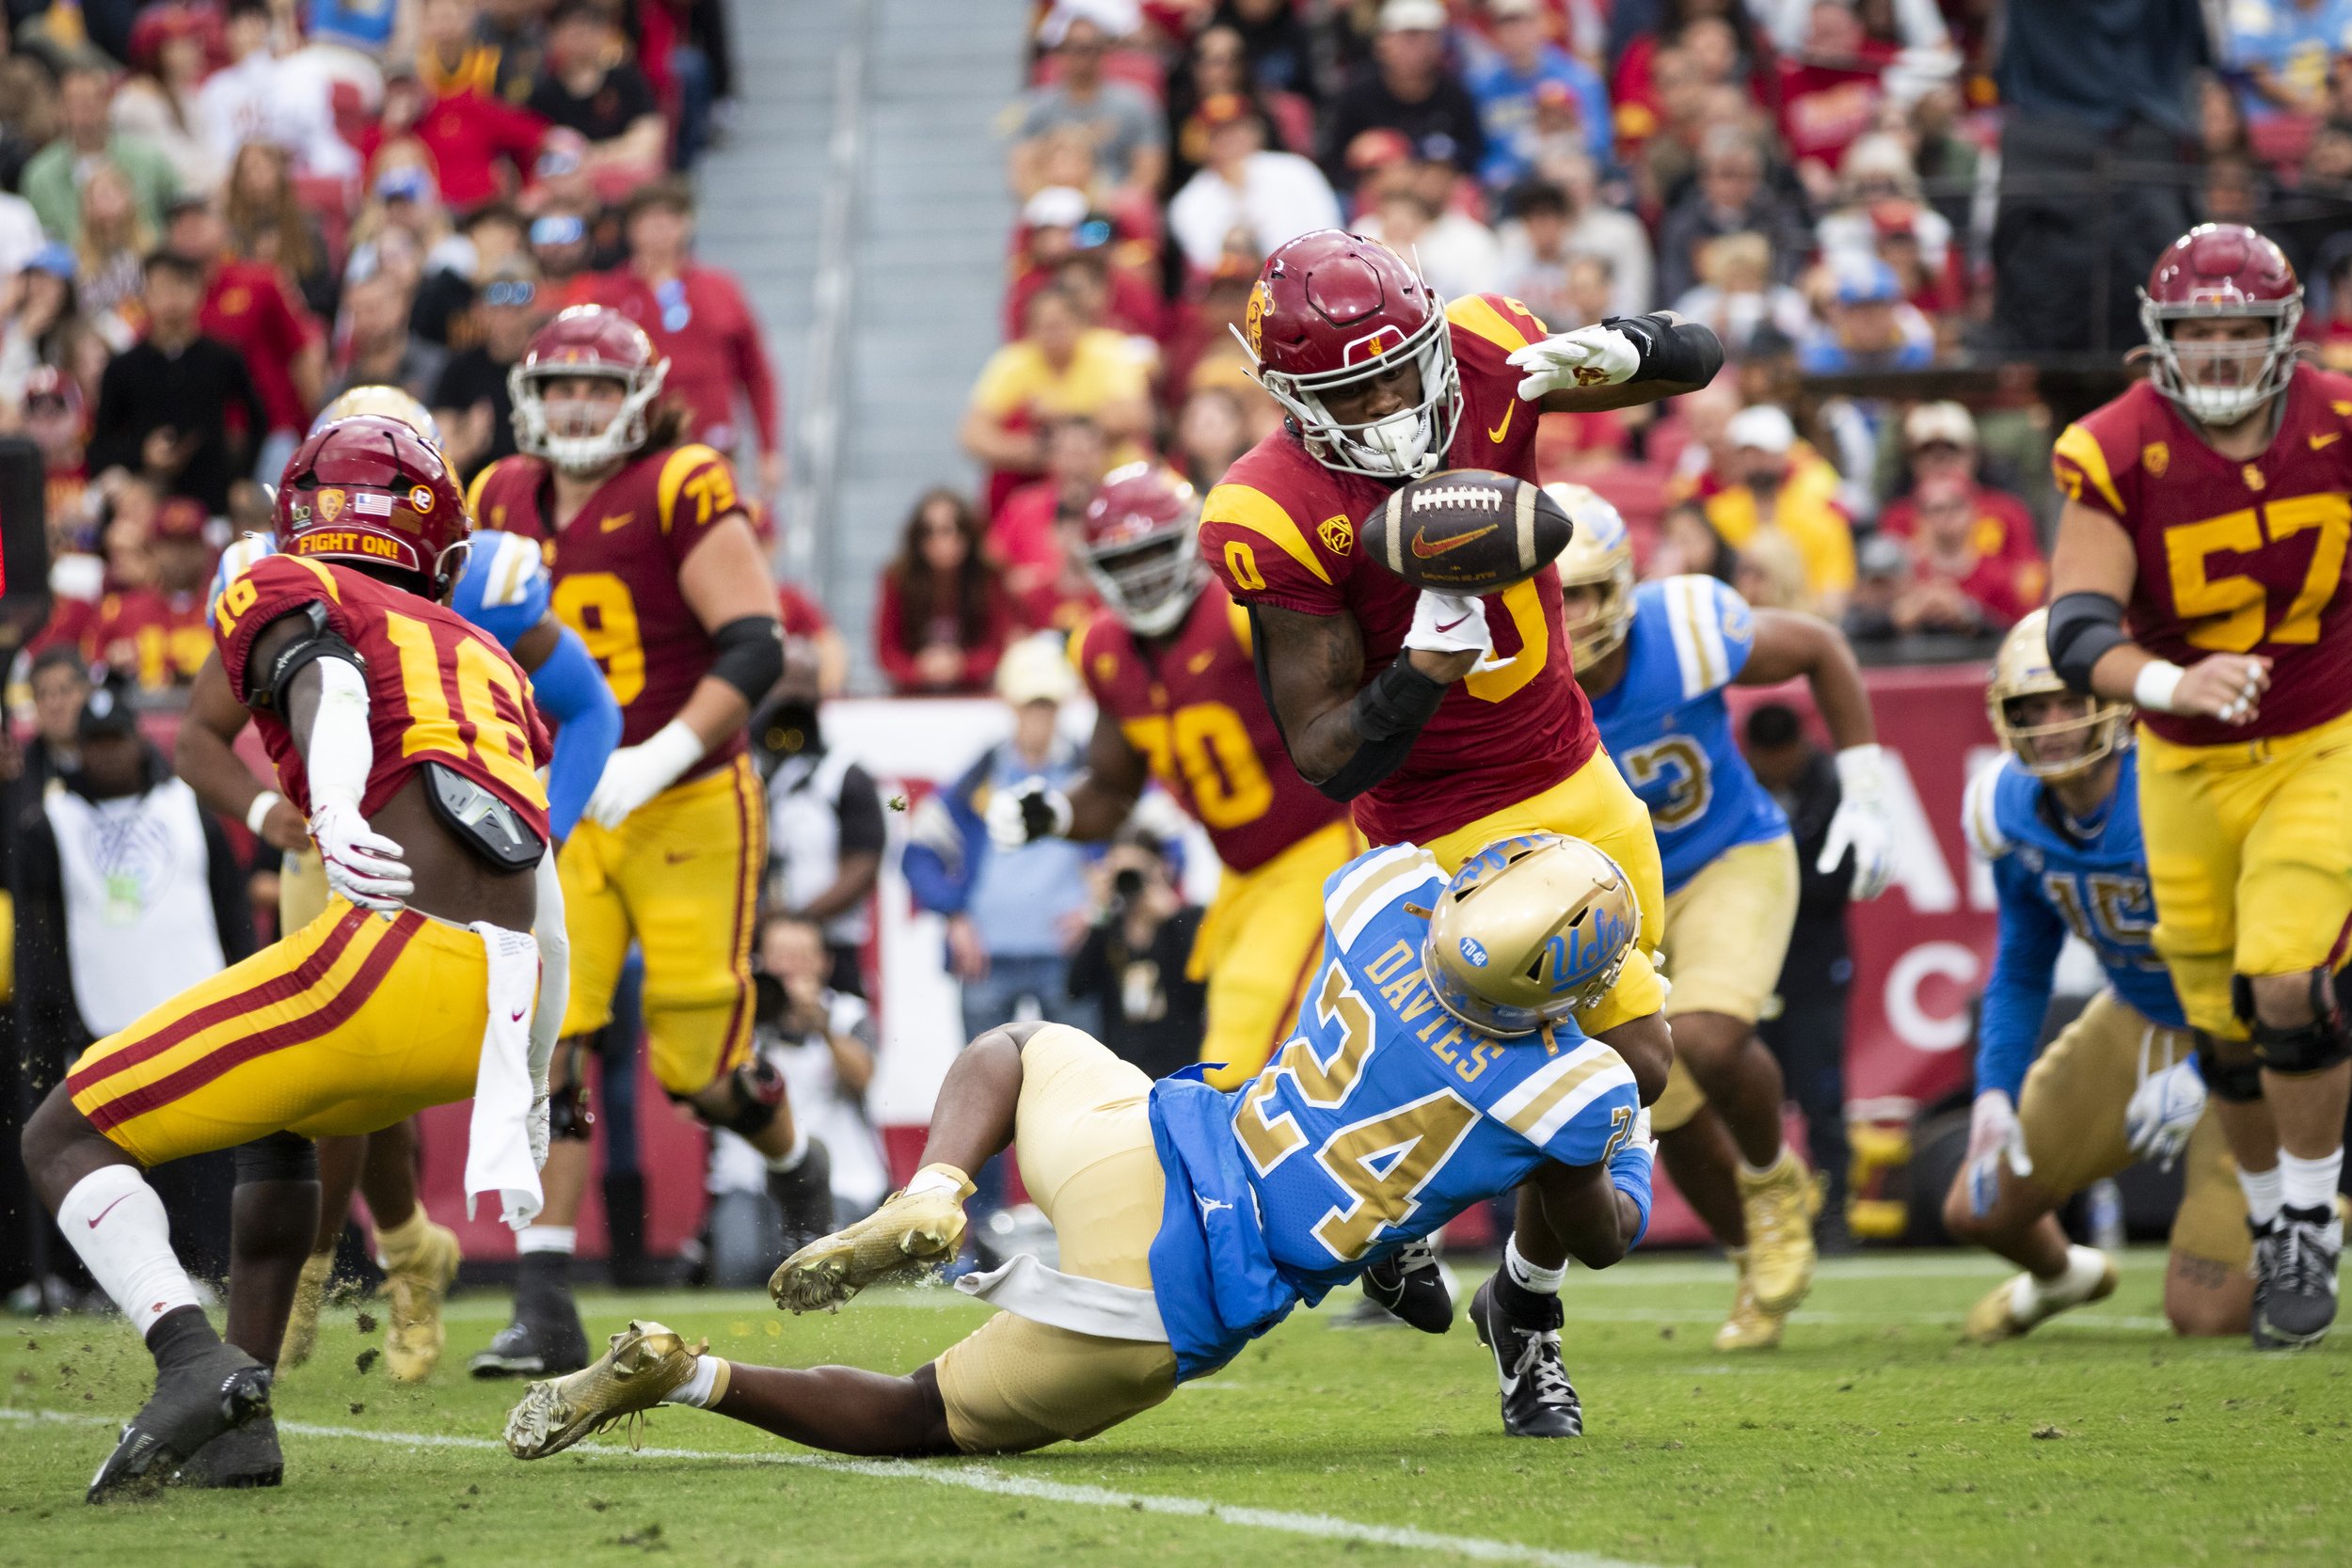  University of Southern California (USC) Trojan running back MarShawn Lloyd (center right) fumbling the ball while getting tackled by University of California, Los Angeles (UCLA) Bruin defensive back Jaylin Davies (center left) during the third quart